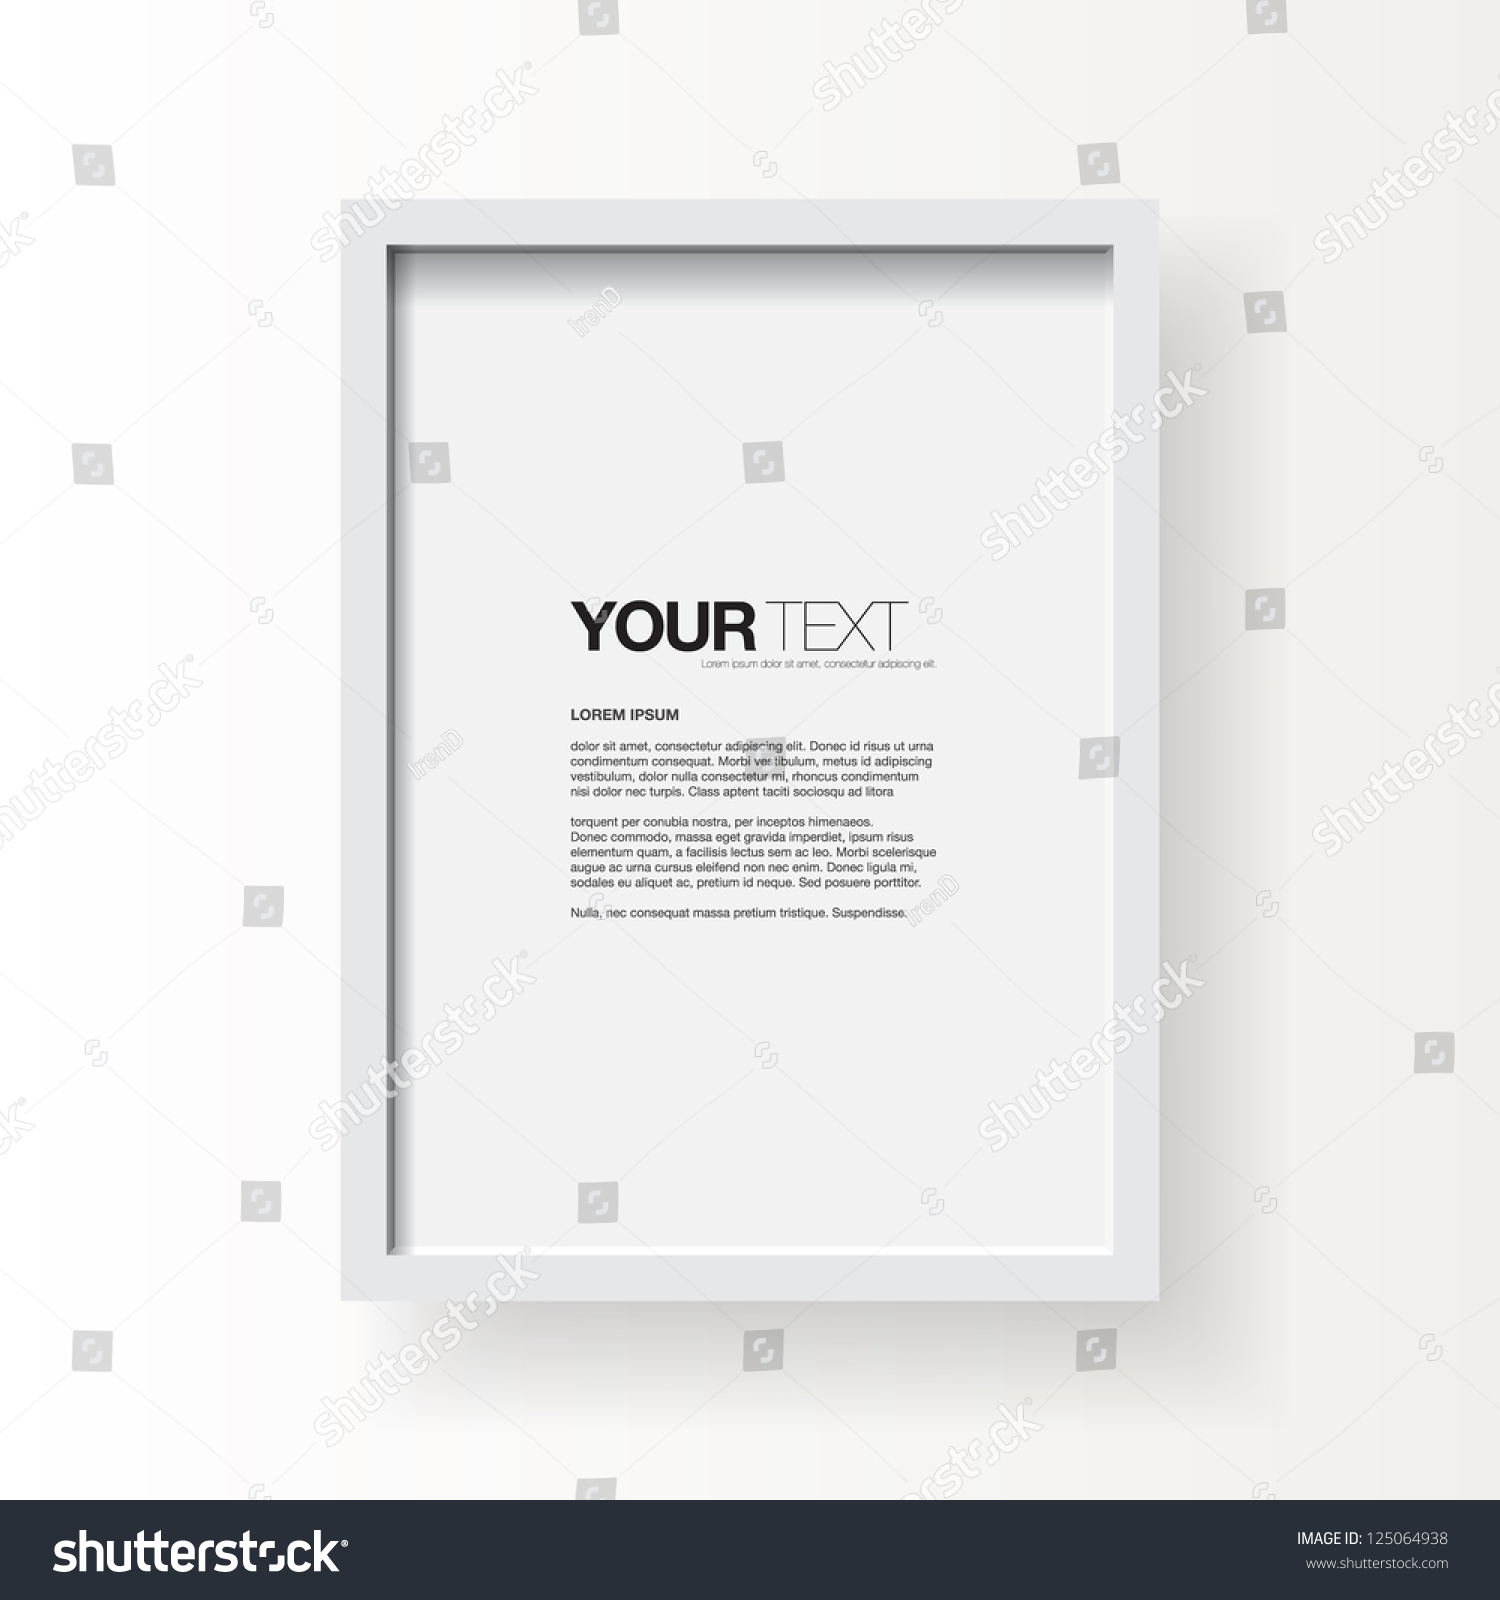 3D picture frame design vector for A4 image or text #125064938